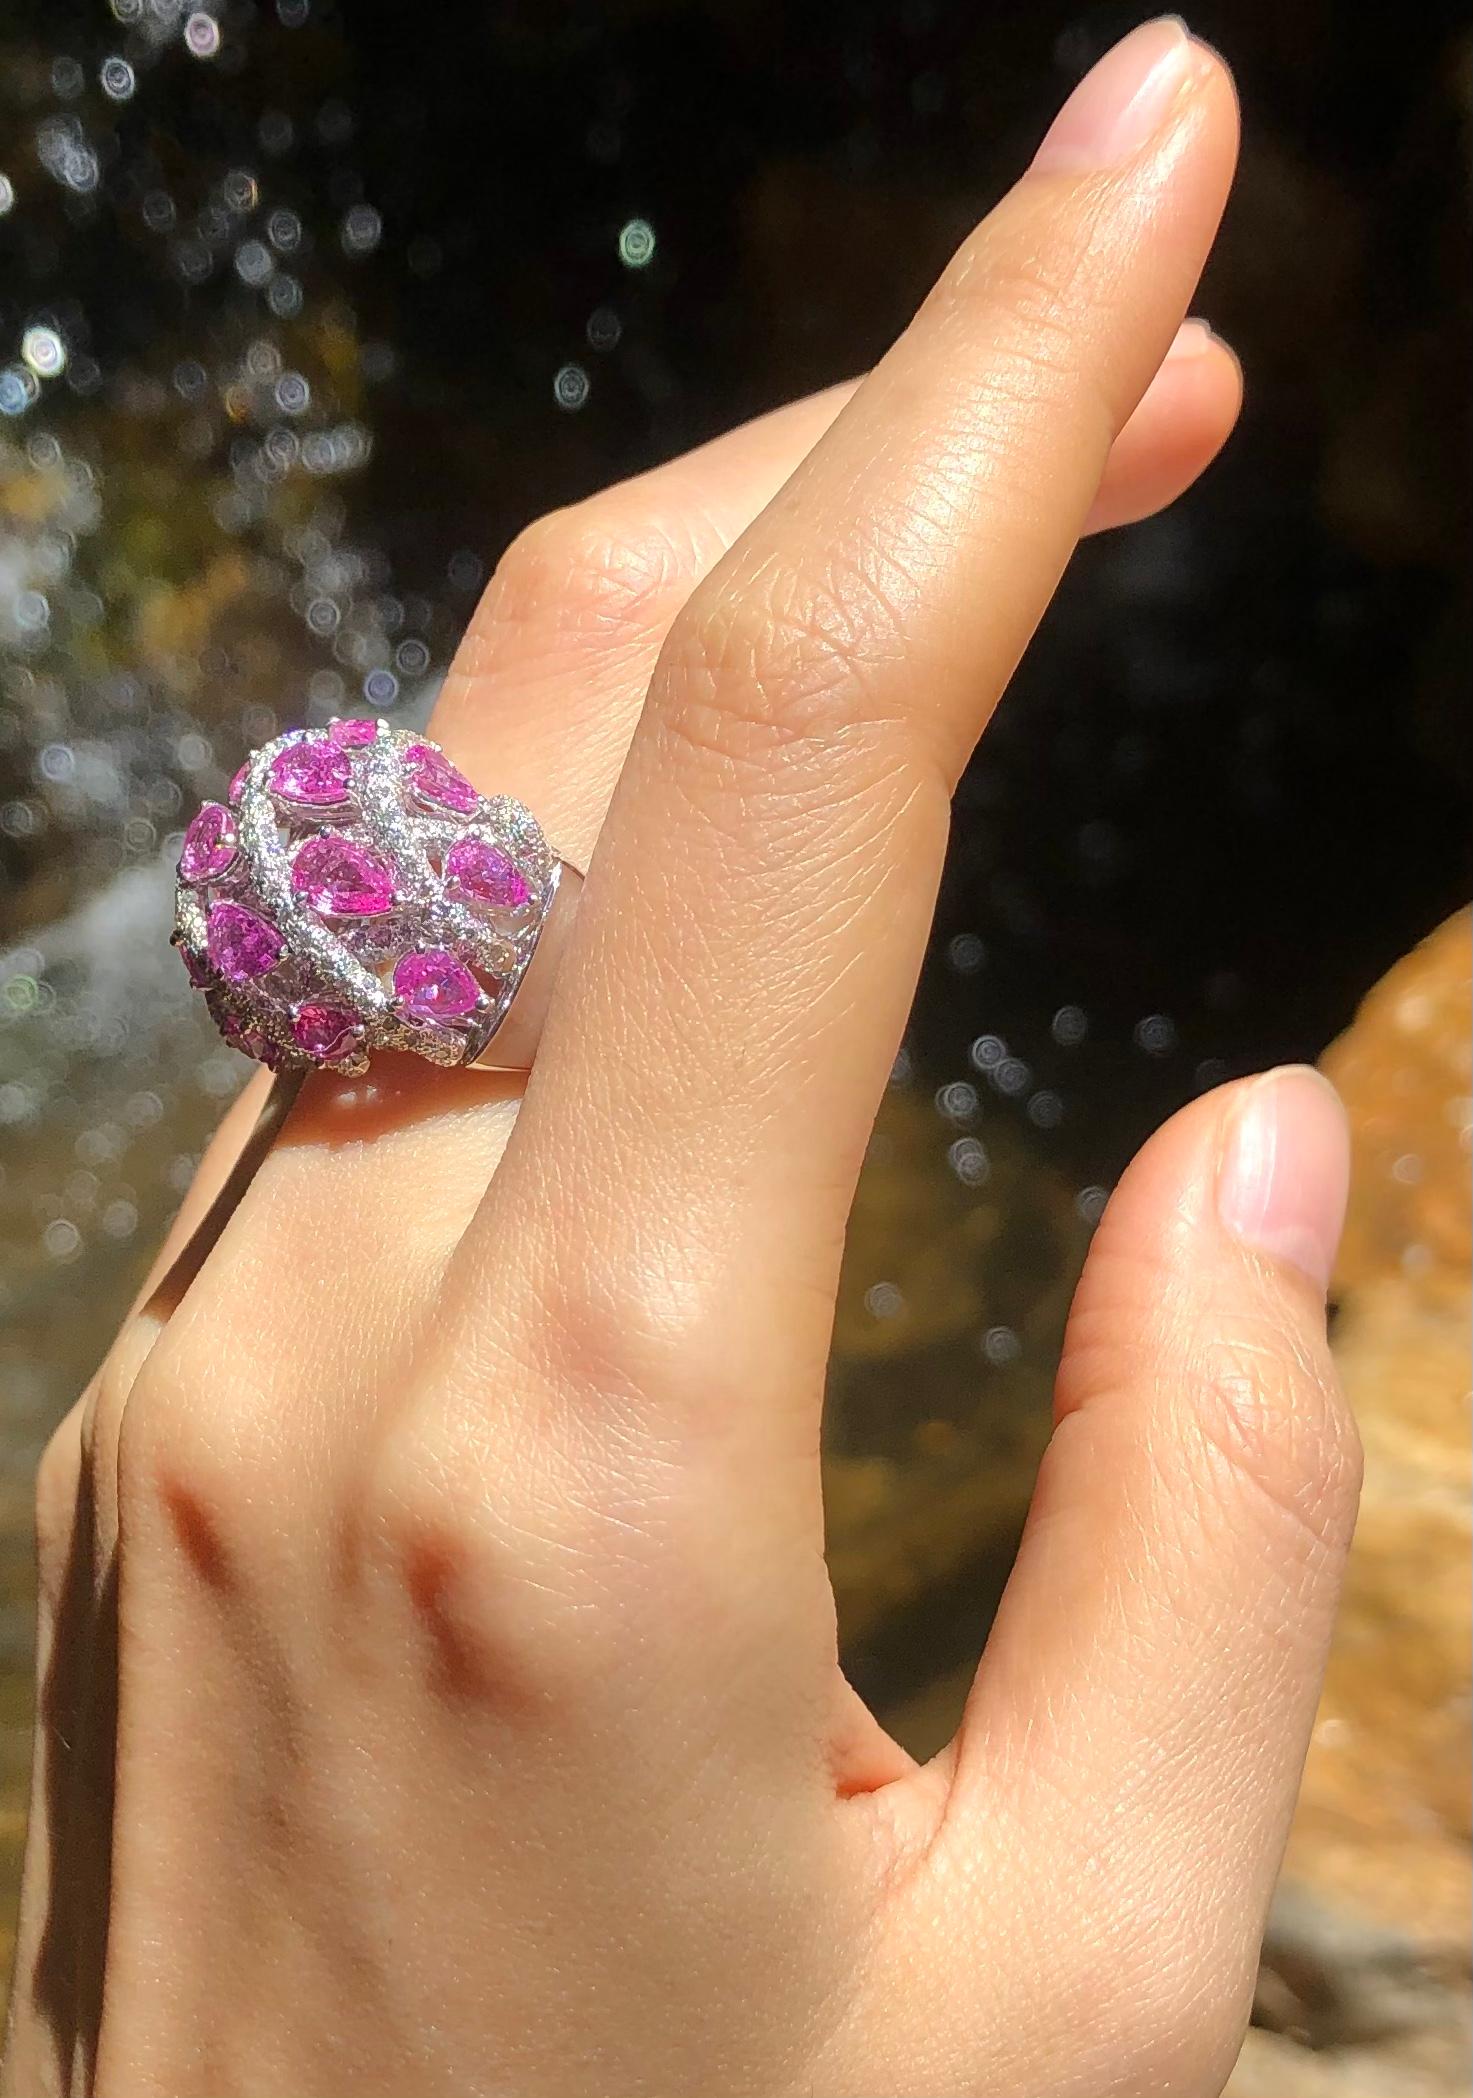 Pink Sapphire 6.06 carats with Diamond 1.60 carats Ring set in 18 Karat White Gold Settings

Width:  2.4 cm 
Length:  1.9 cm
Ring Size: 54
Total Weight: 21.77 grams

